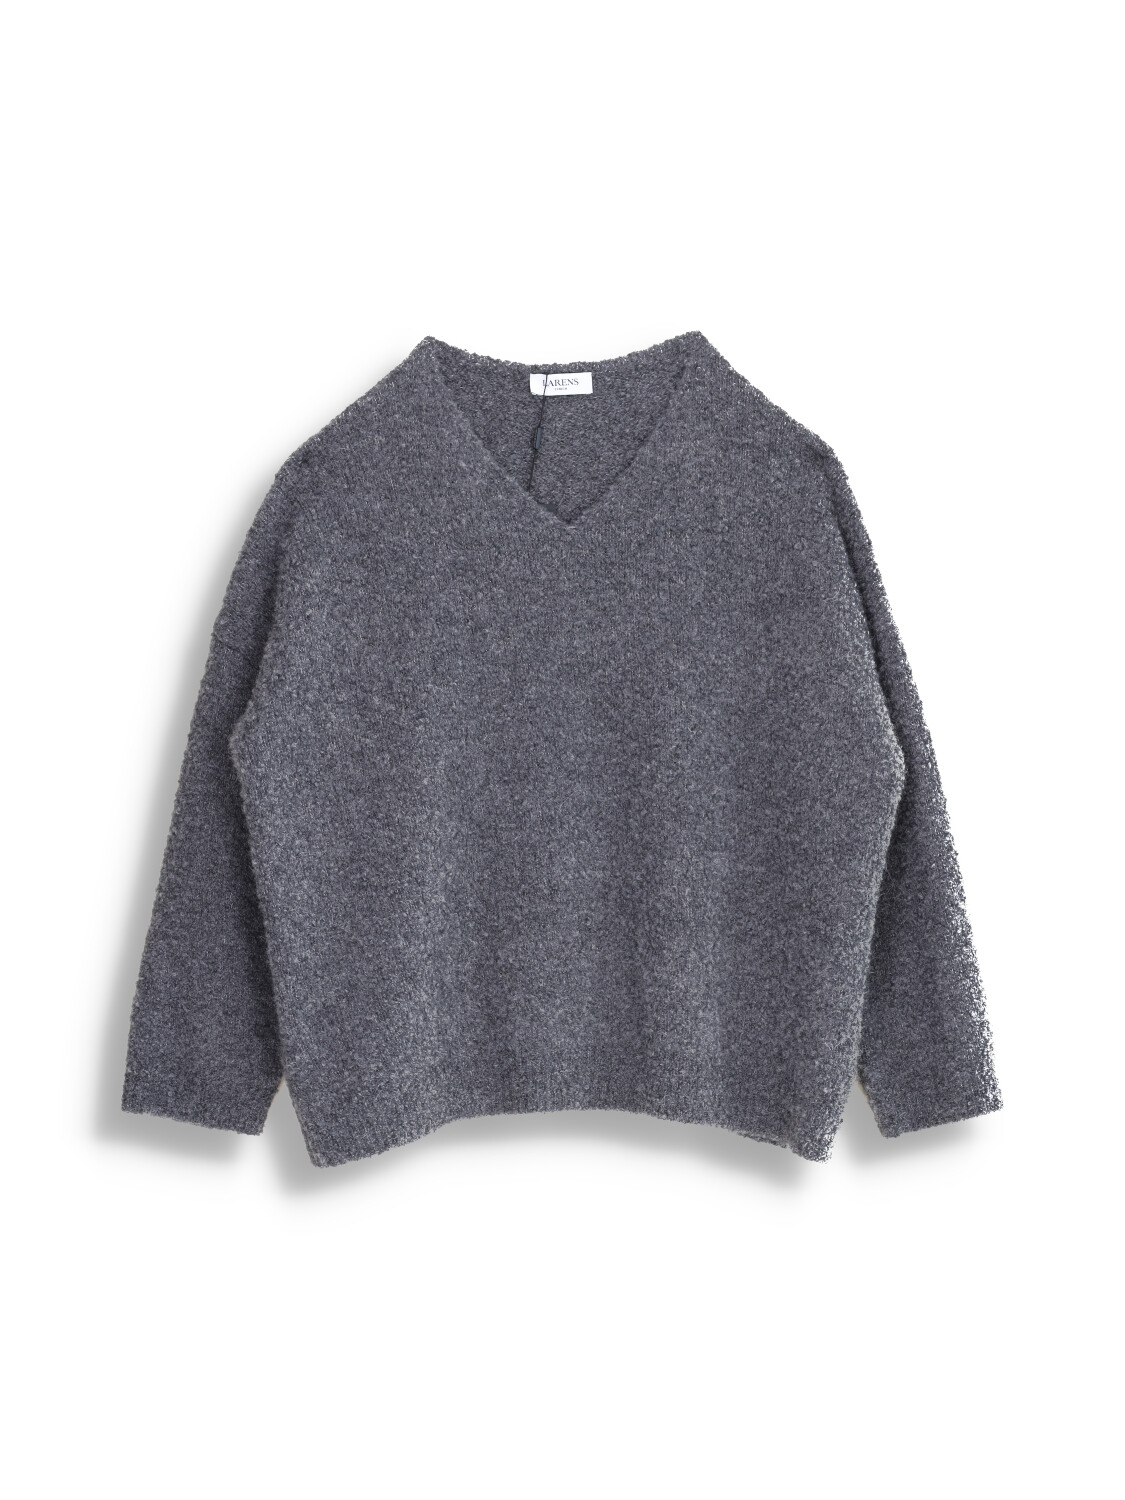 Oversized V-Neck sweater in cashmere and alpaca